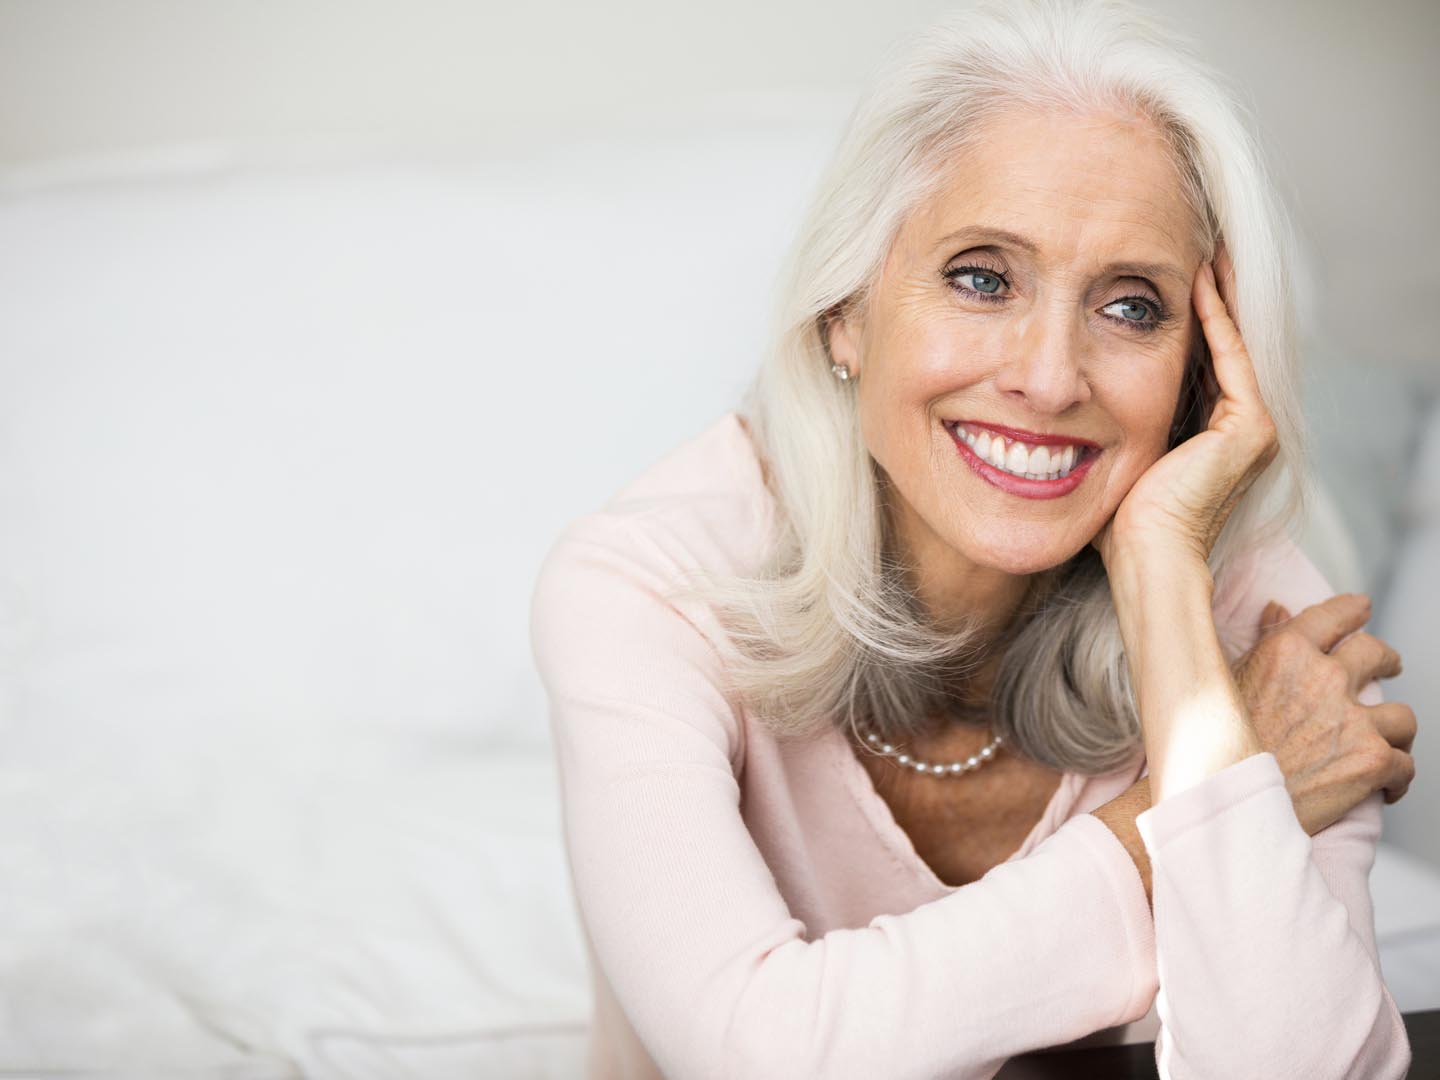 Portrait of a woman in her golden age. Portrait of a beautiful woman in her 60s. She is mature, confident and happy. Woman has grey hair. Woman is Caucasian with blue eyes and beautiful smile. She is leaning her head on her wrist.